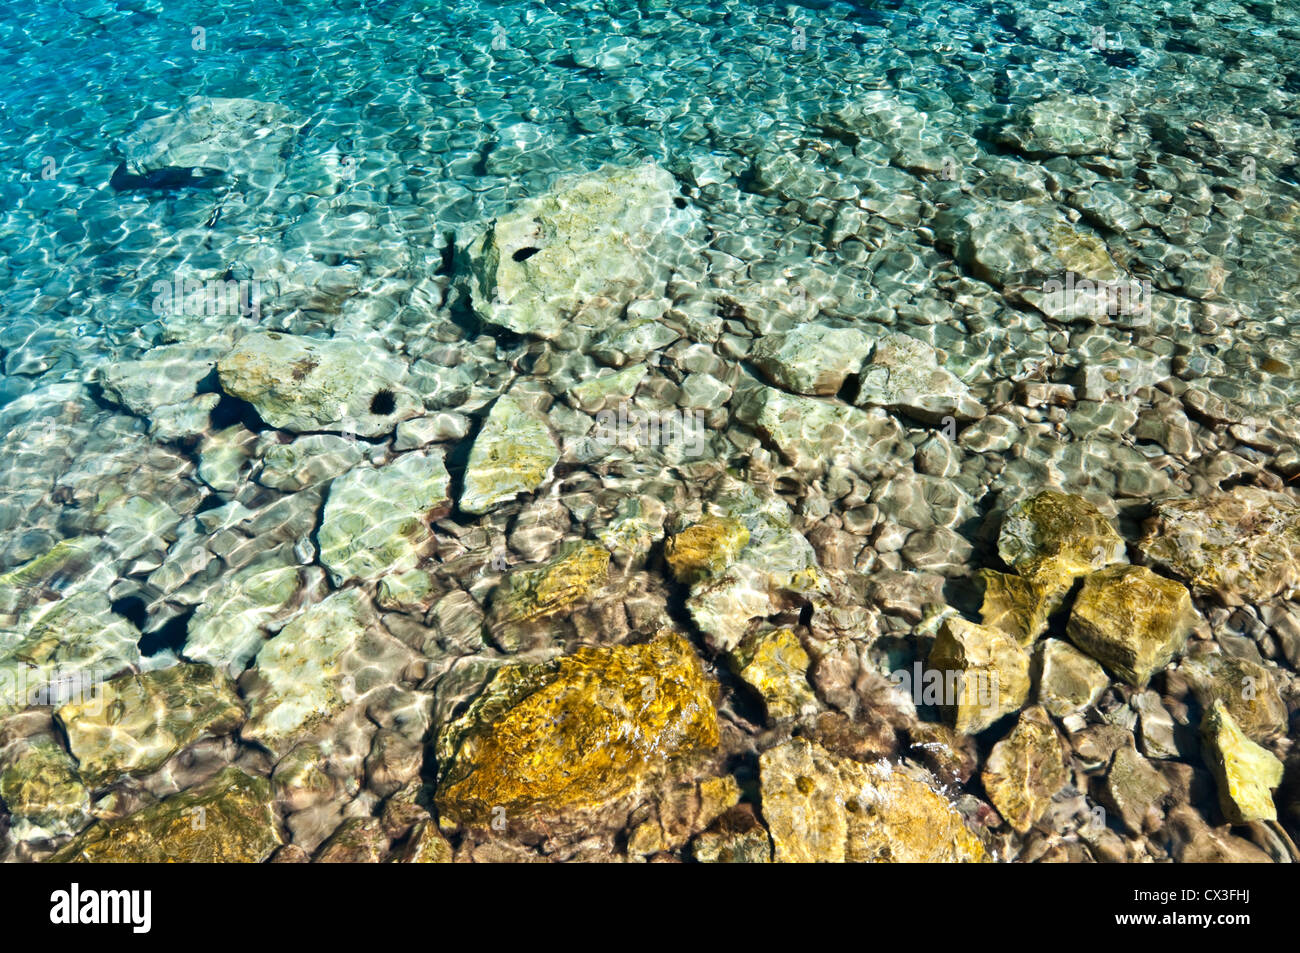 Clear, transparent water on Croatian coast with stones and black urchins Stock Photo